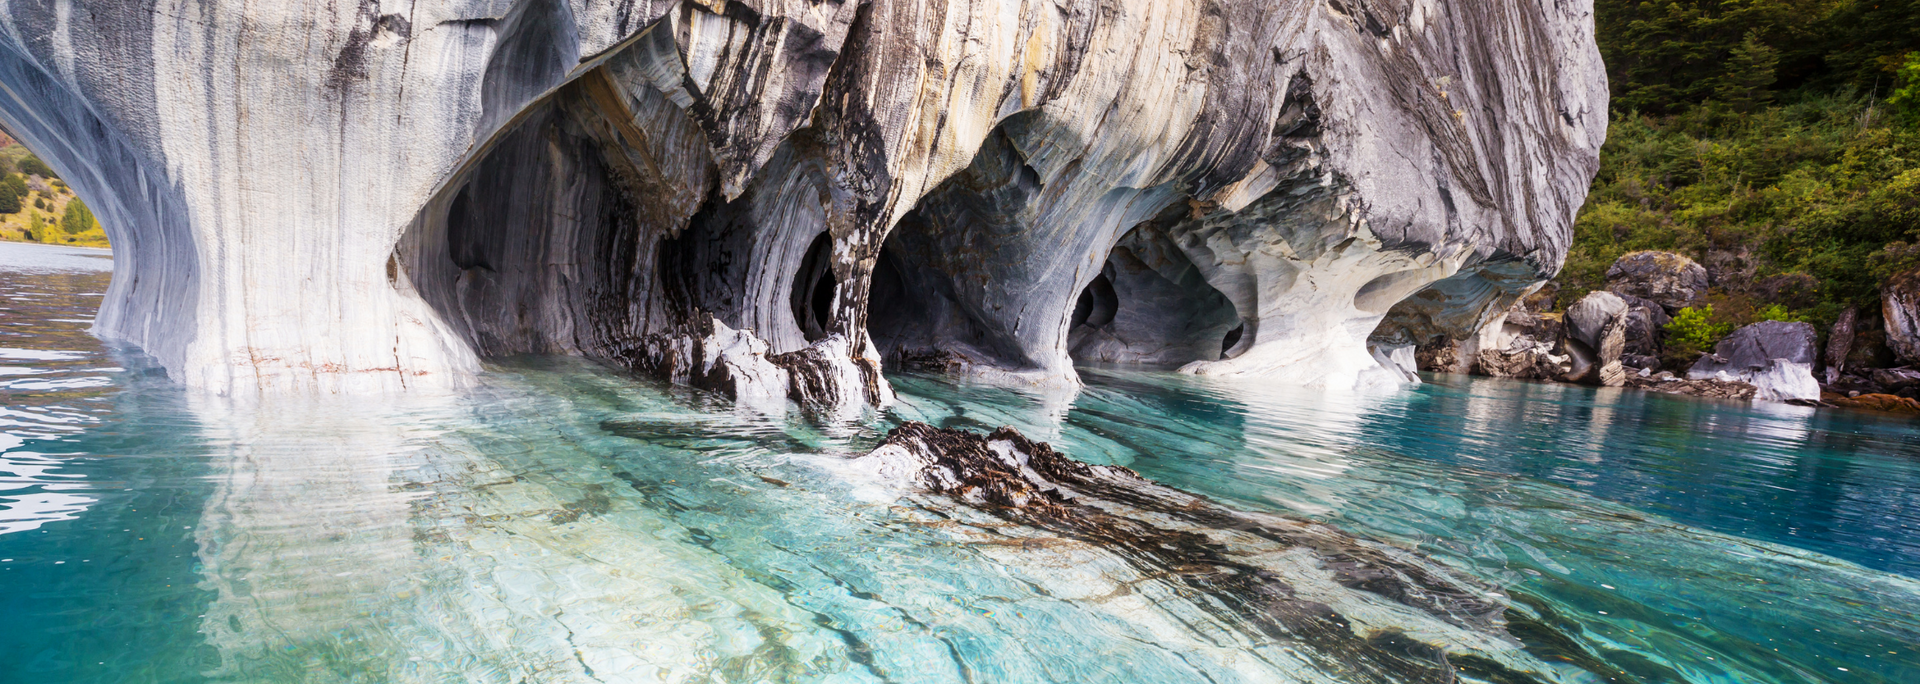 Picture of the Marble Caves.
